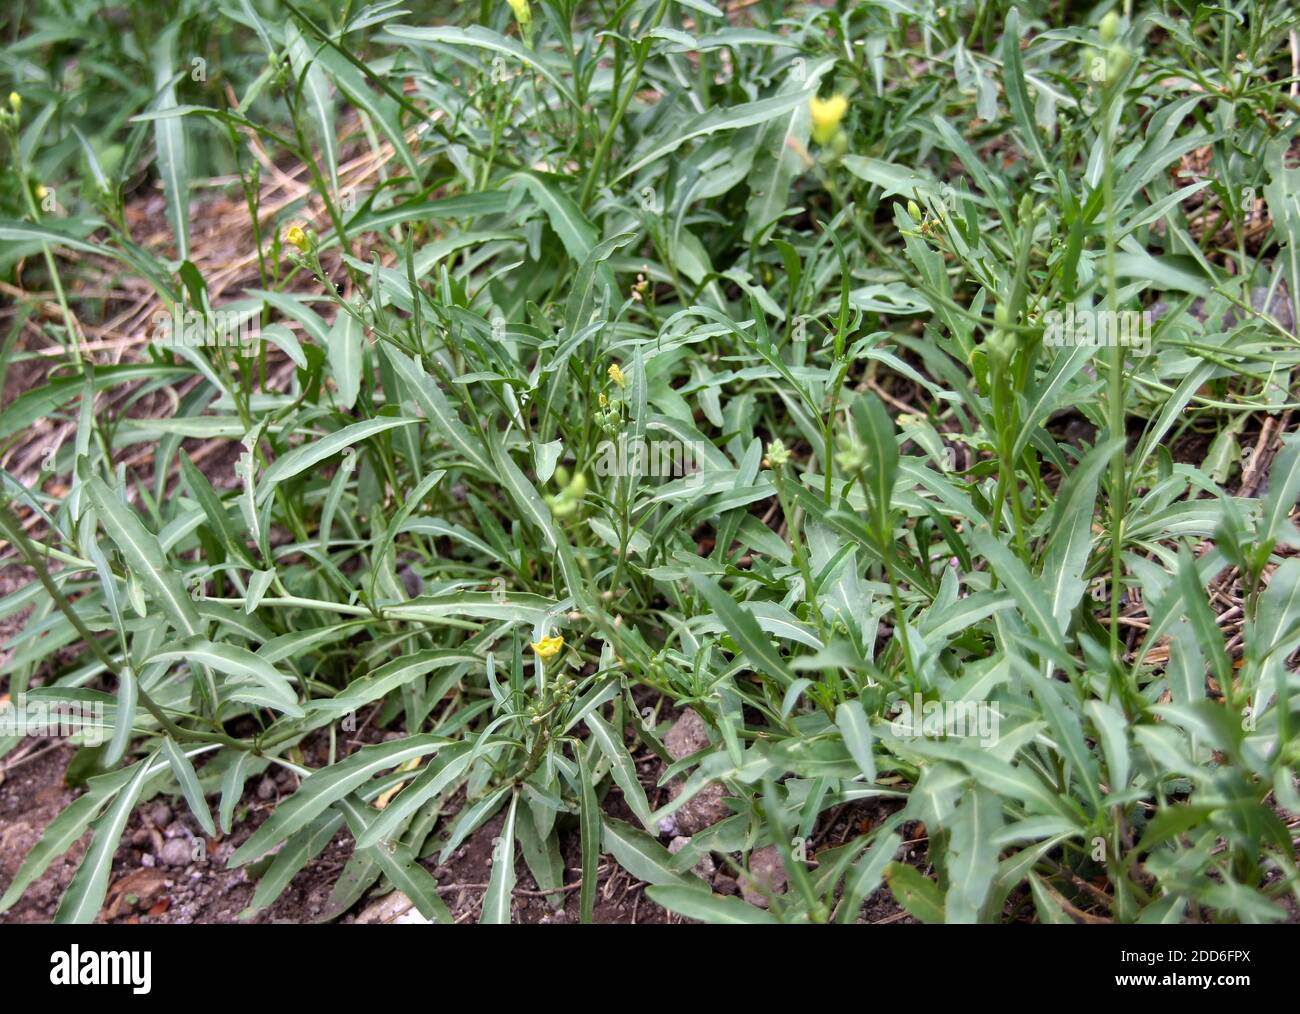 Wild edible Italian arugula (Diplotaxis tenuifolia) growing at the roadside of Rome city, Italy. This plant is often used for salads in cuisine. Stock Photo